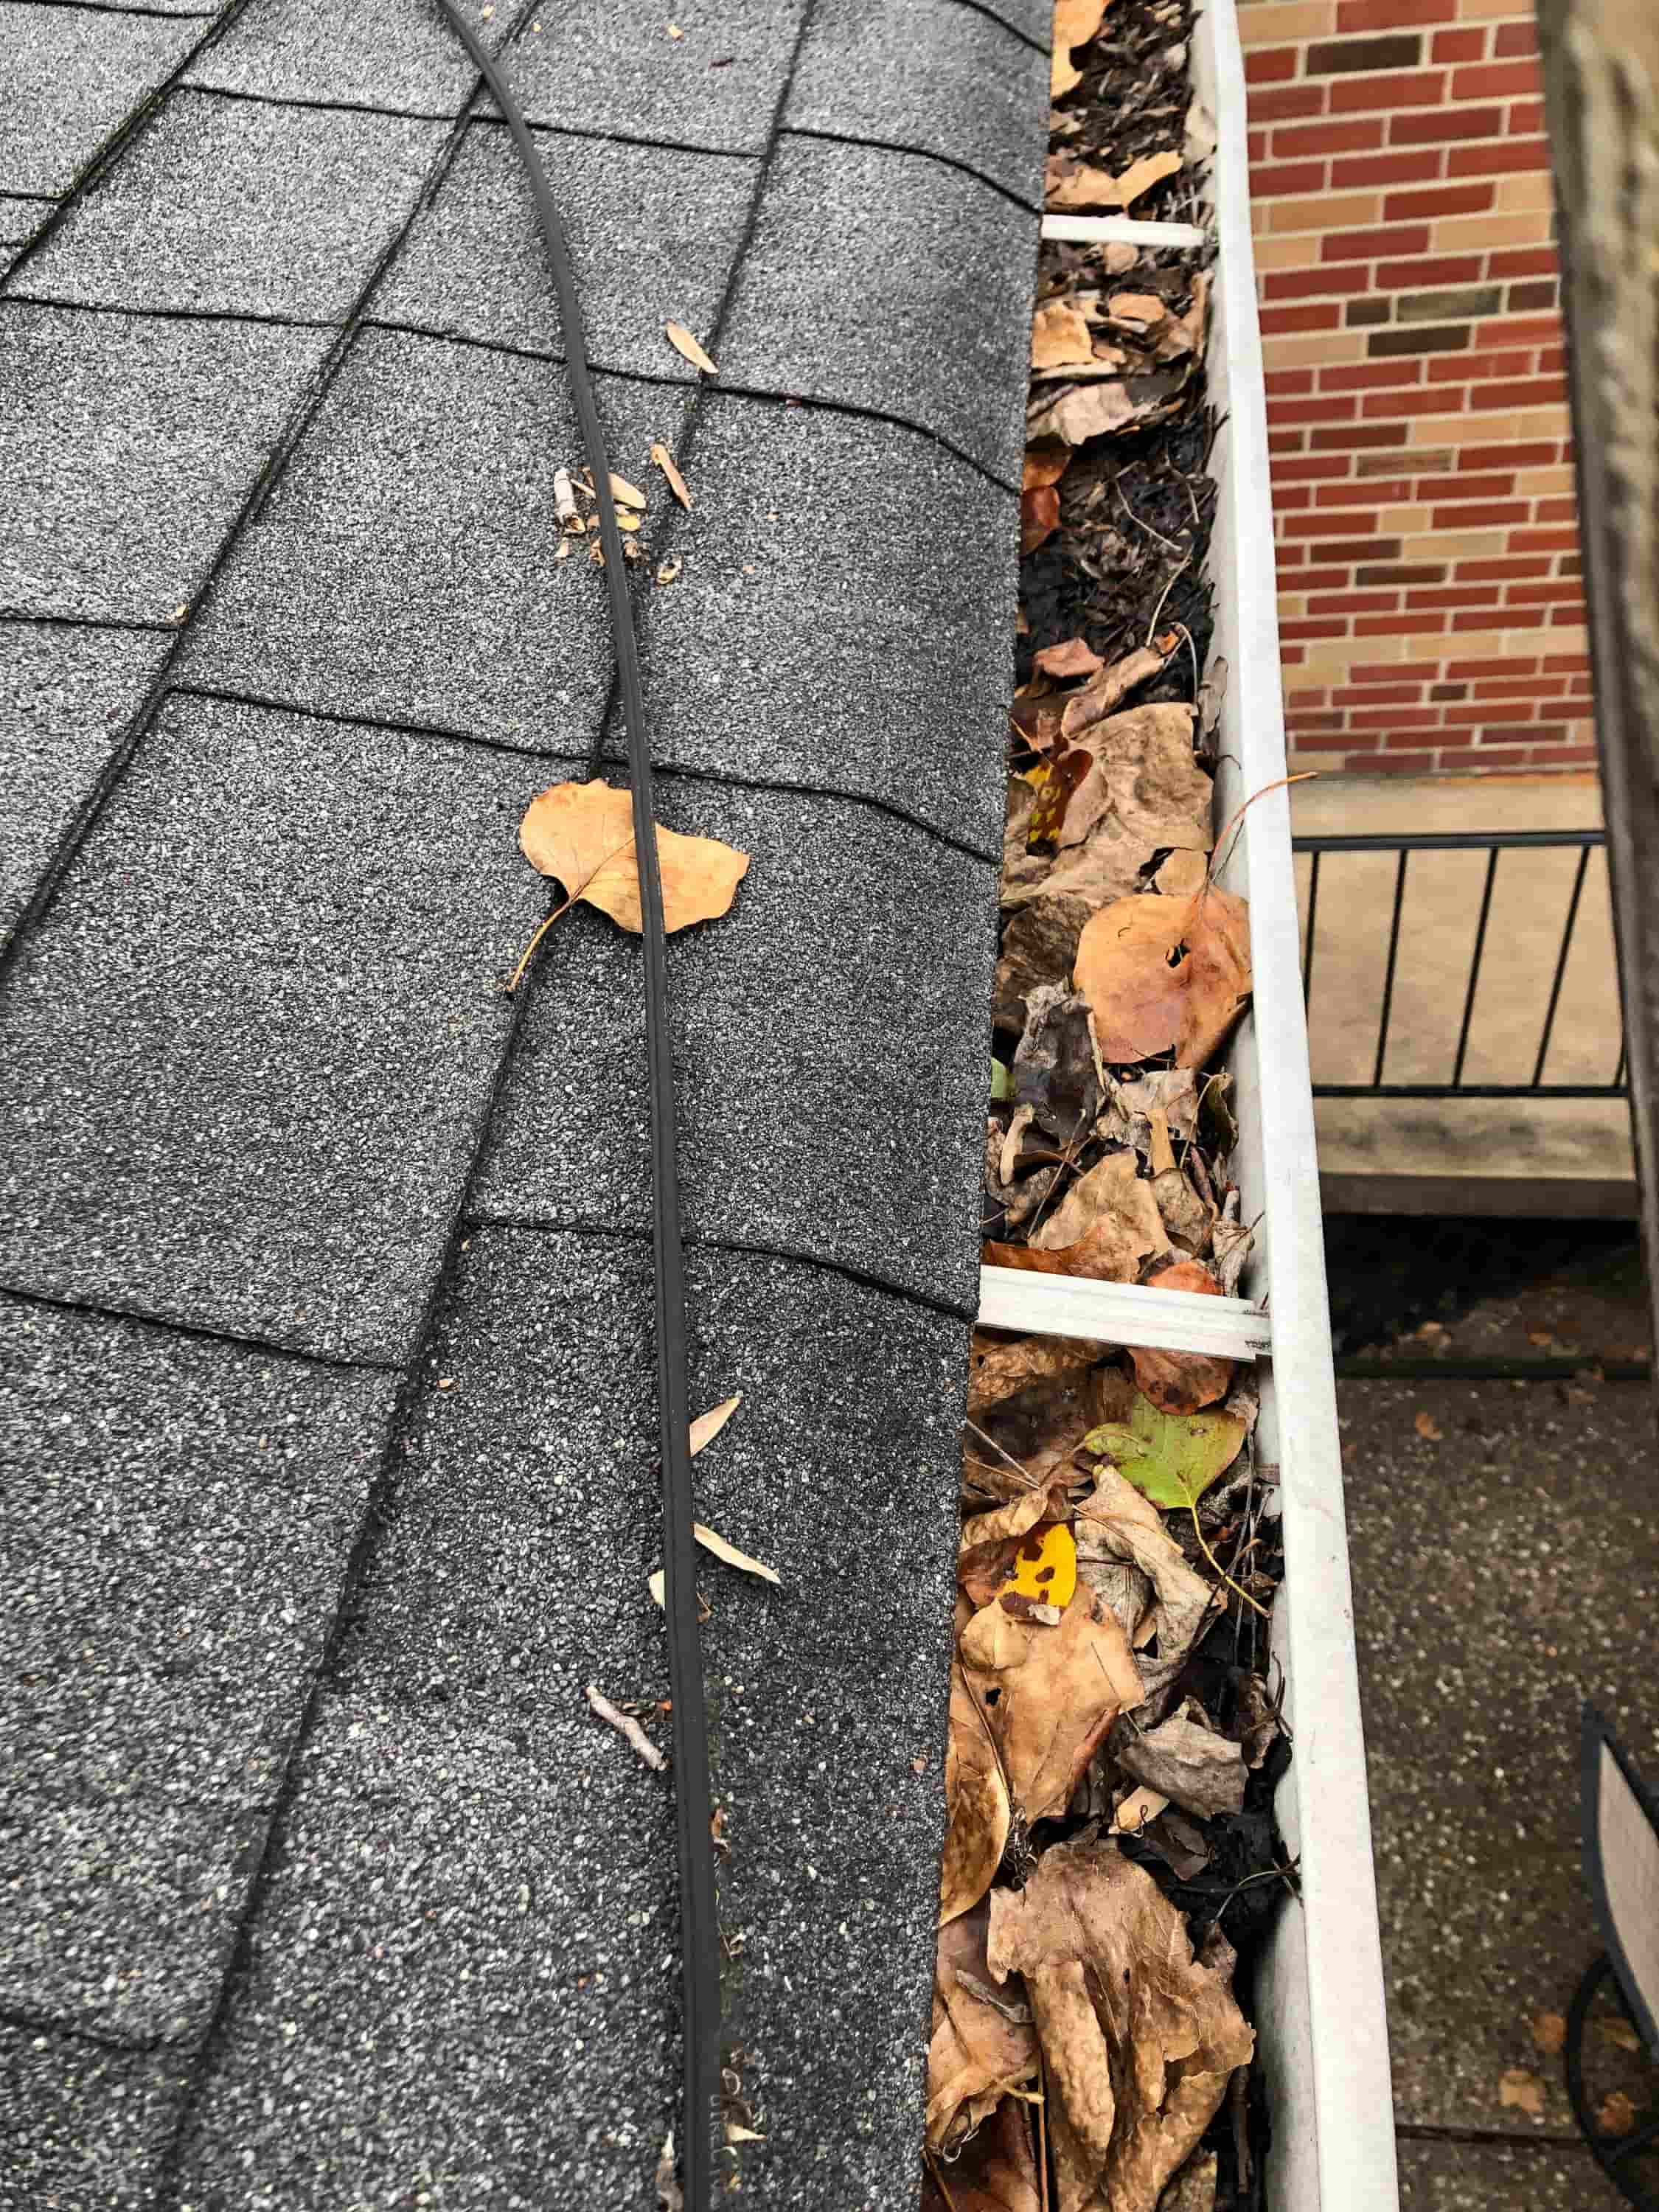 how to clean seamless gutters